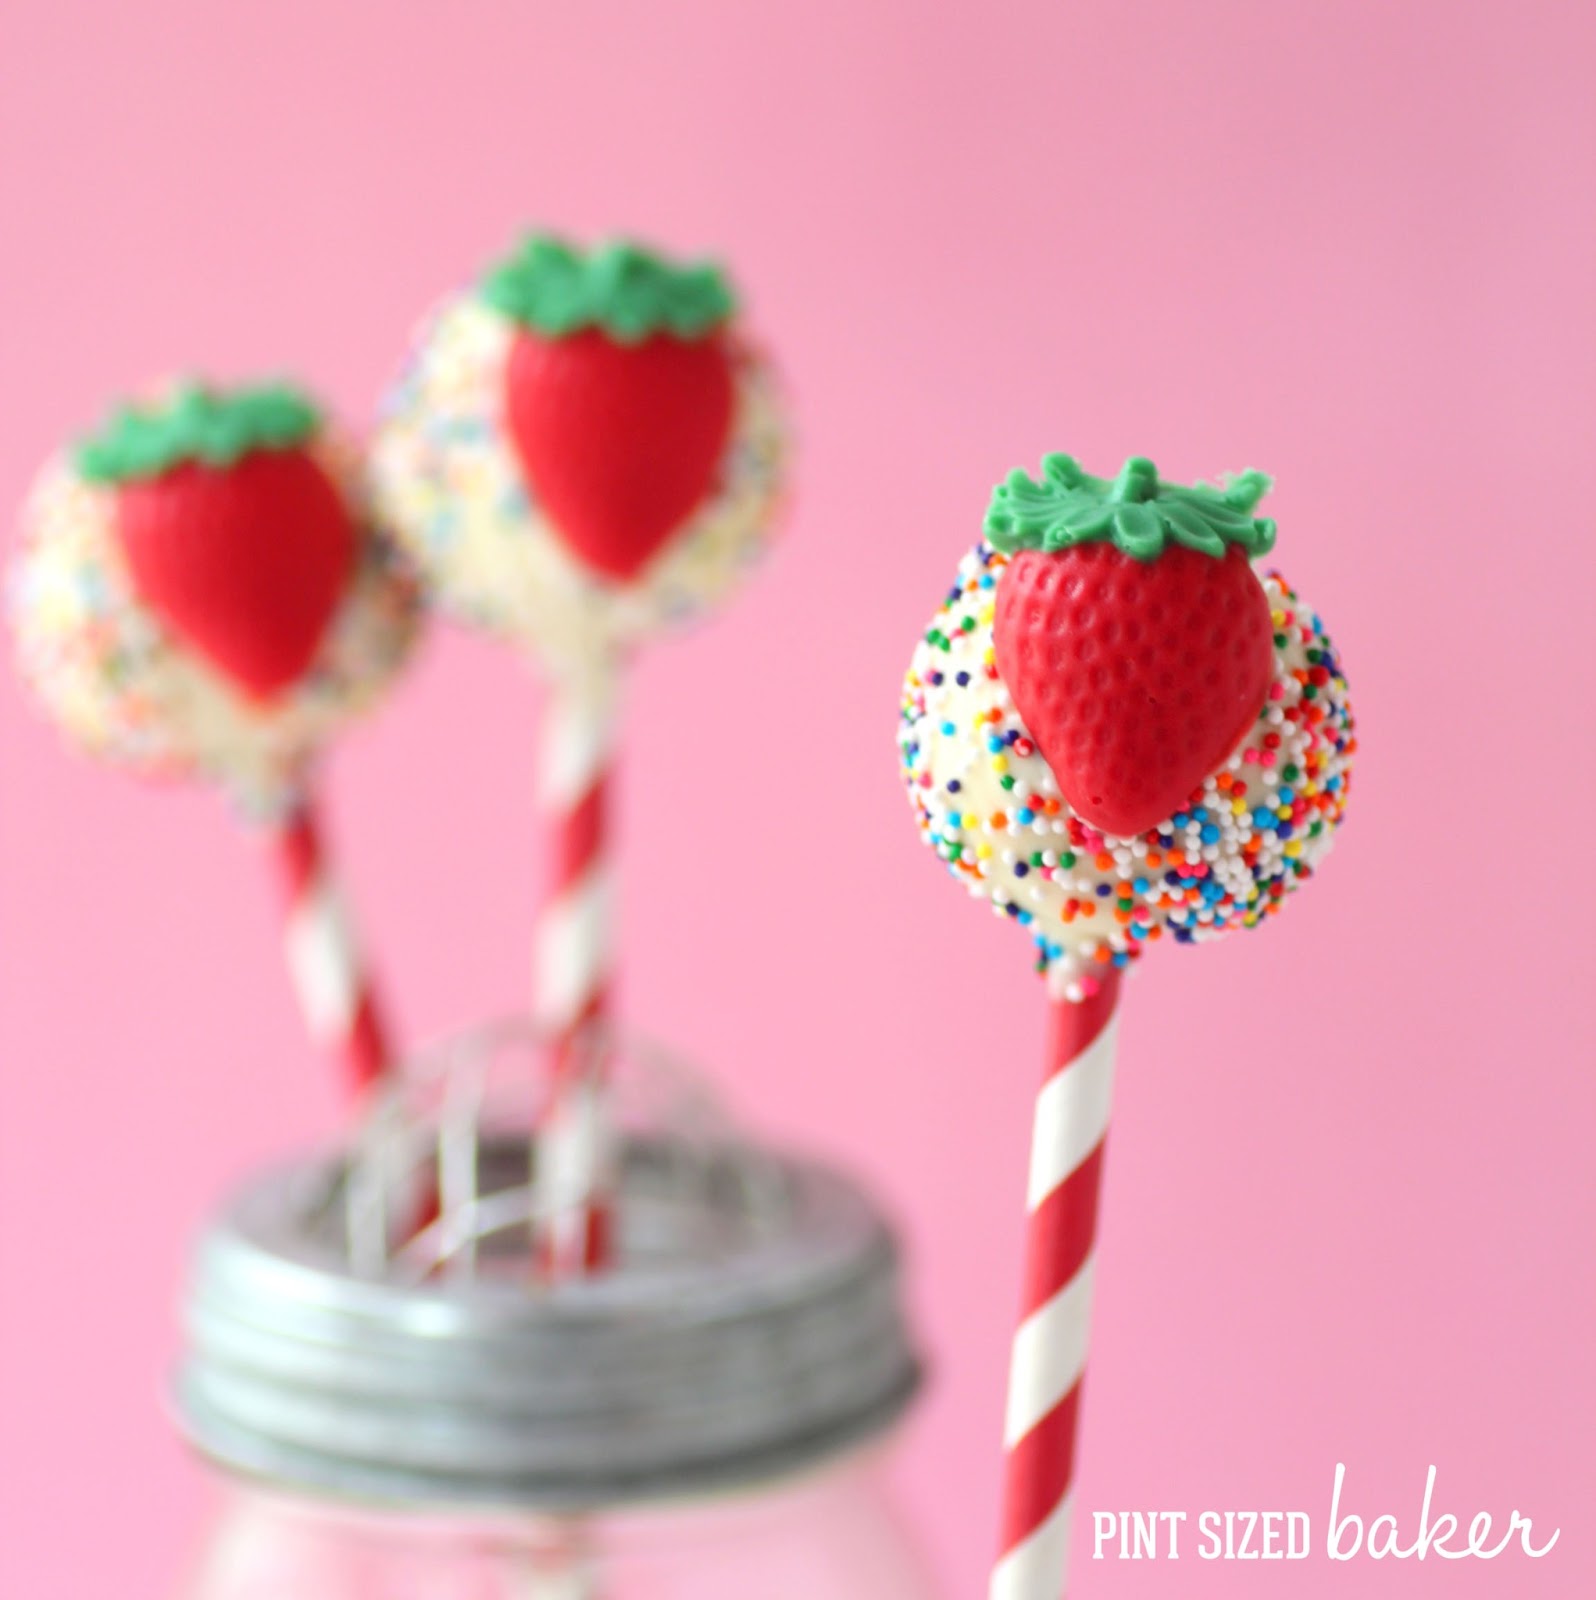 Strawberry Cake Pops with a Mold - Pint Sized Baker